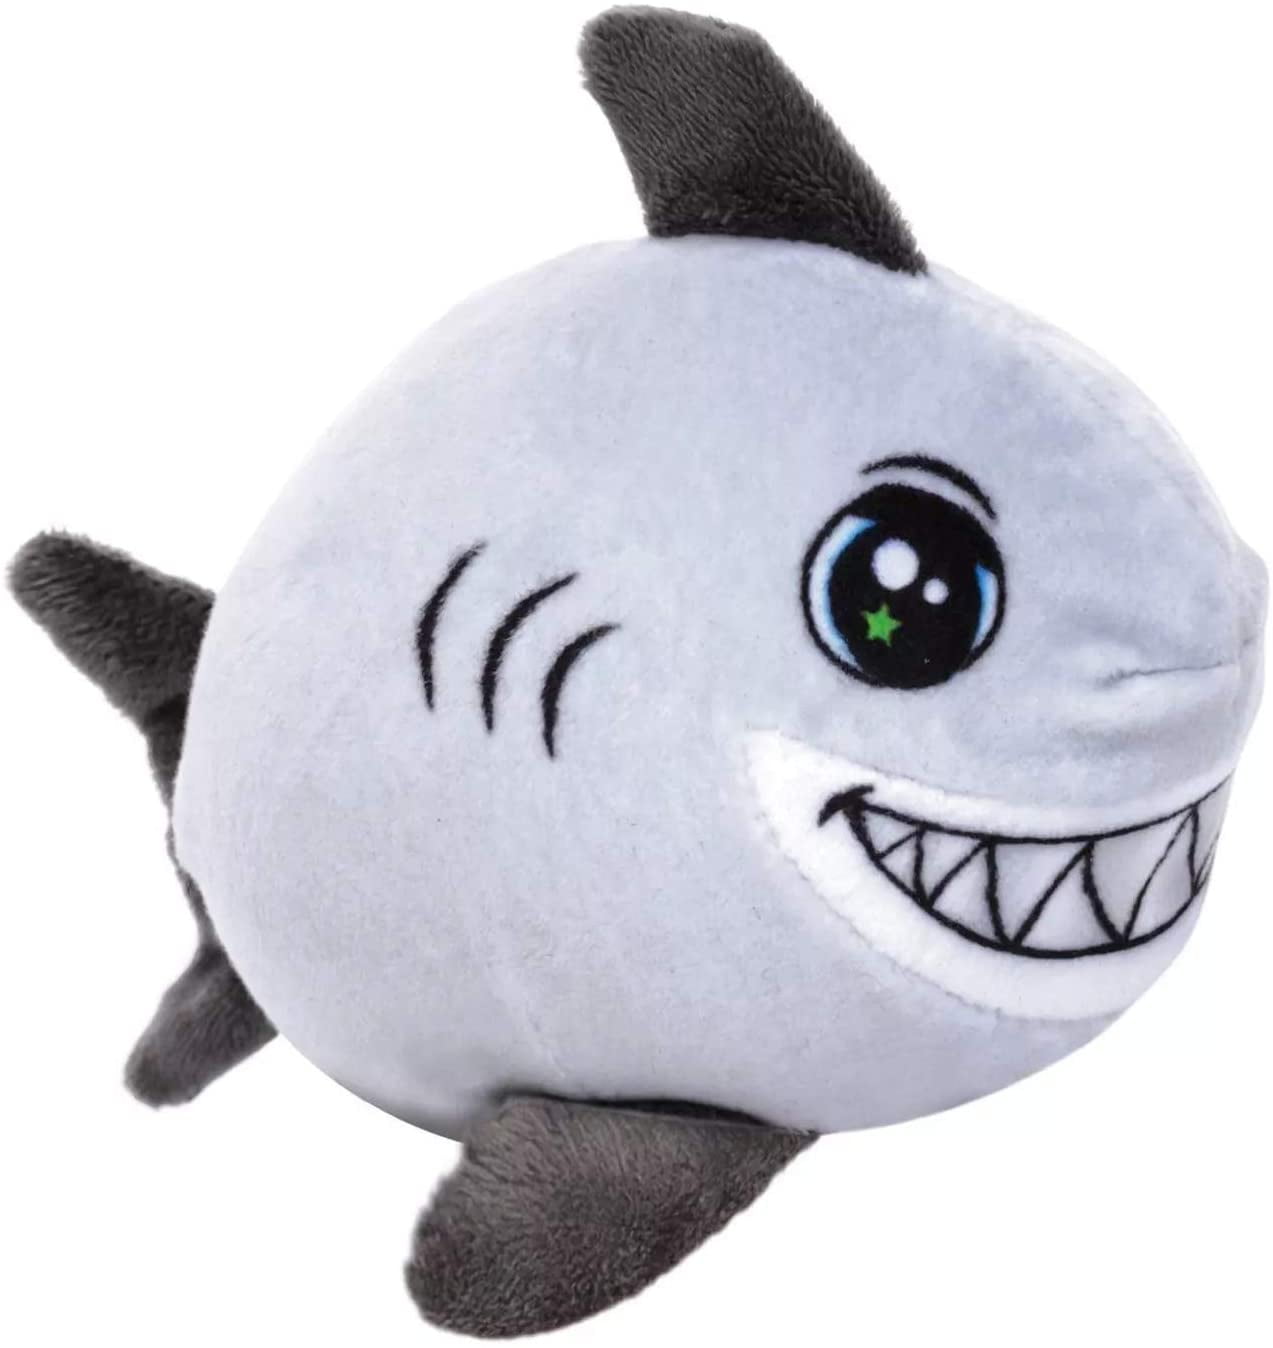 Wubble Fuzzy Spike The Shark Squishable Stuffed Plush Award Winning Toy for sale online 